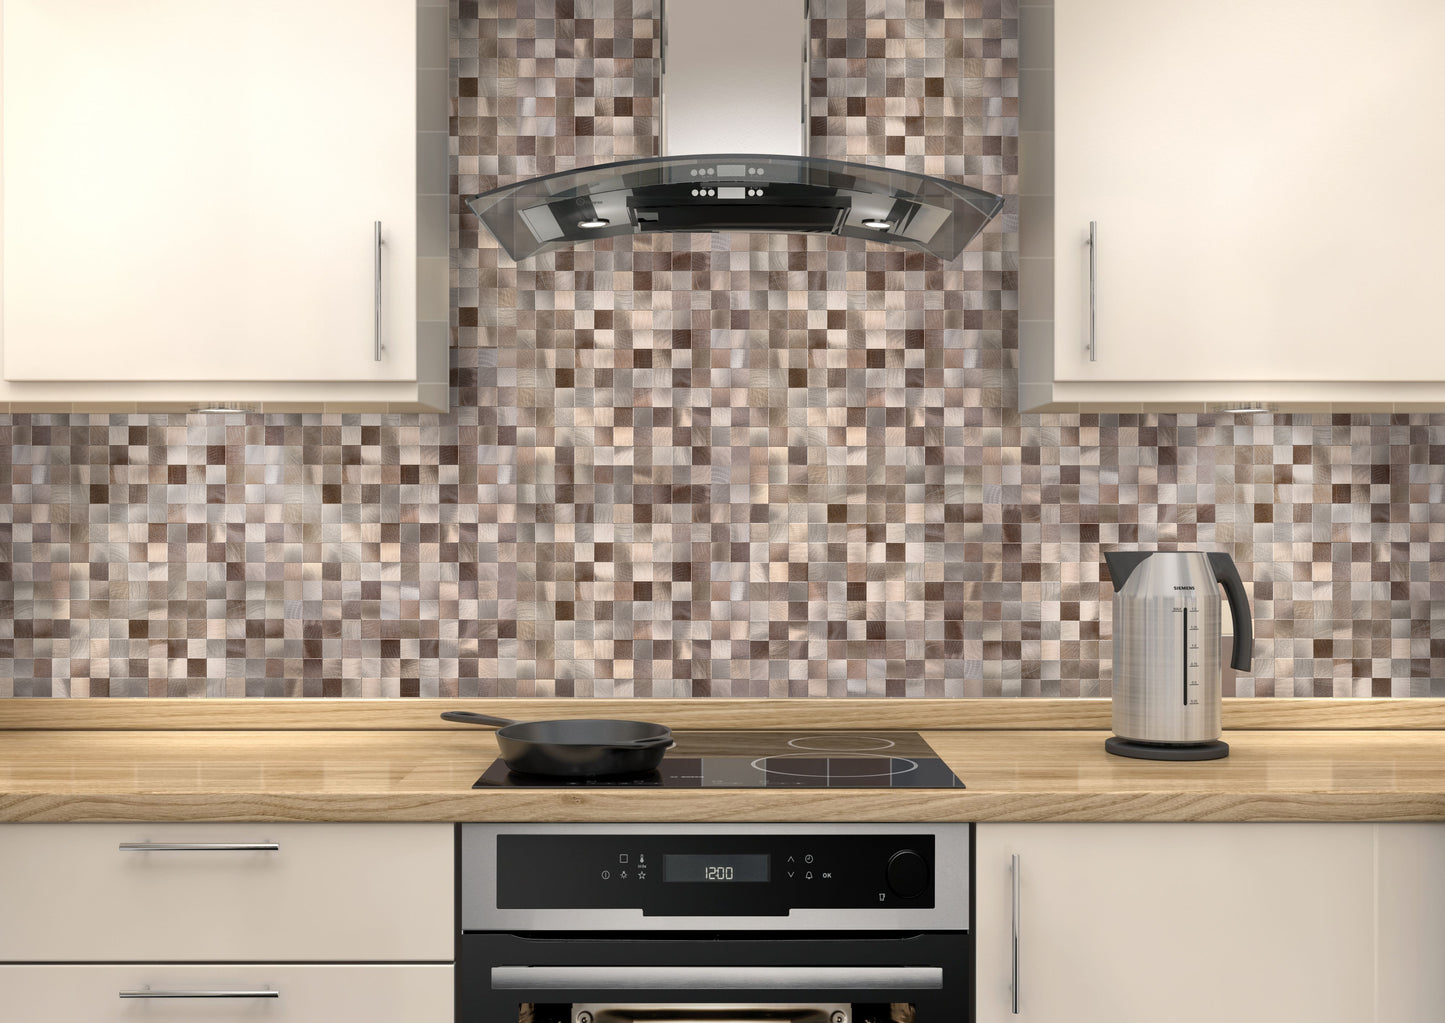 Decopus Metal Tile Peel and Stick Backsplash (MS25 Copper Brown Muted-Gold 12in x 12in. 4mm thick)